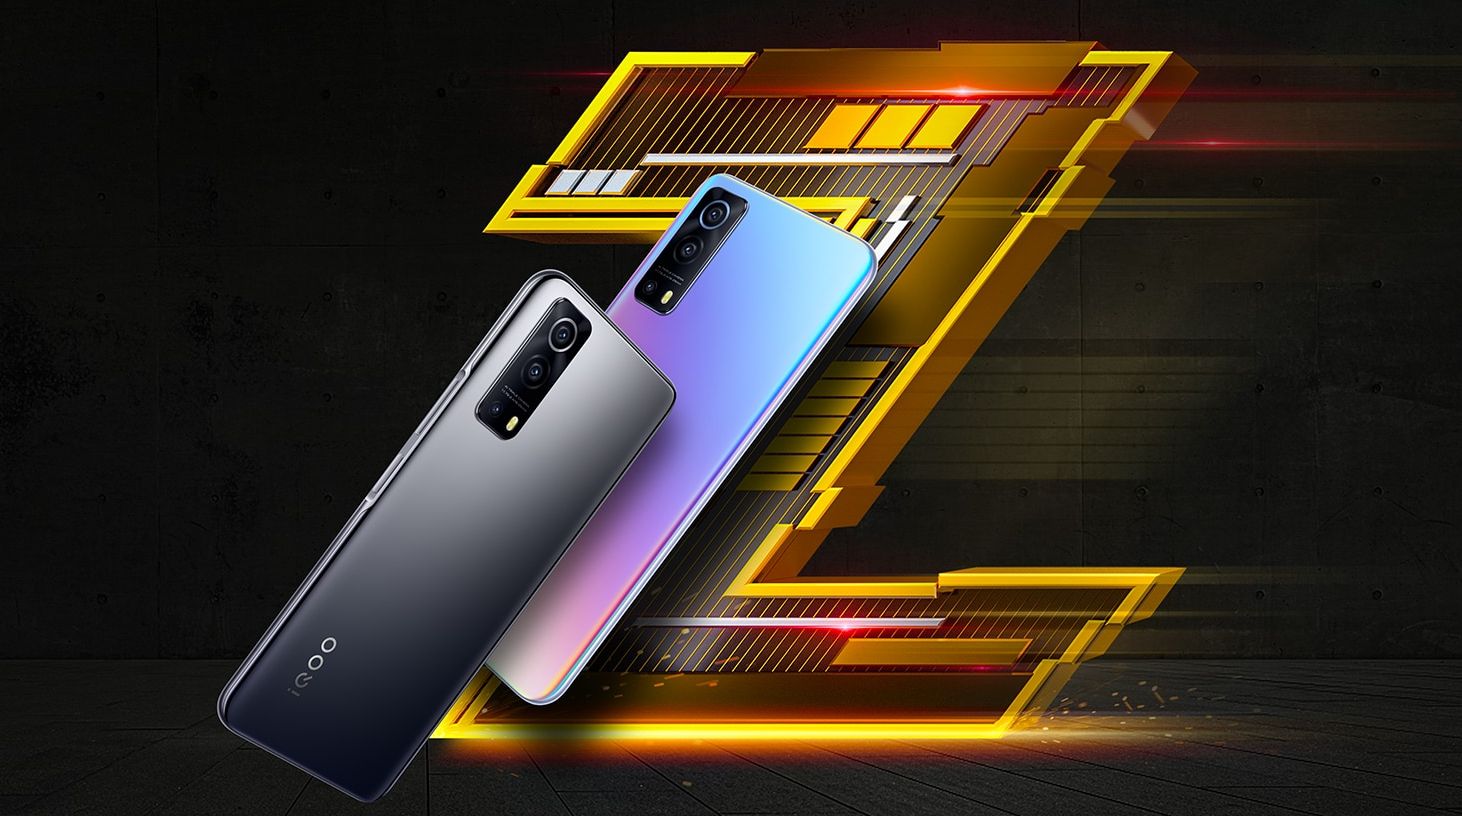 iQOO Z5 5G official launch date confirmed by company